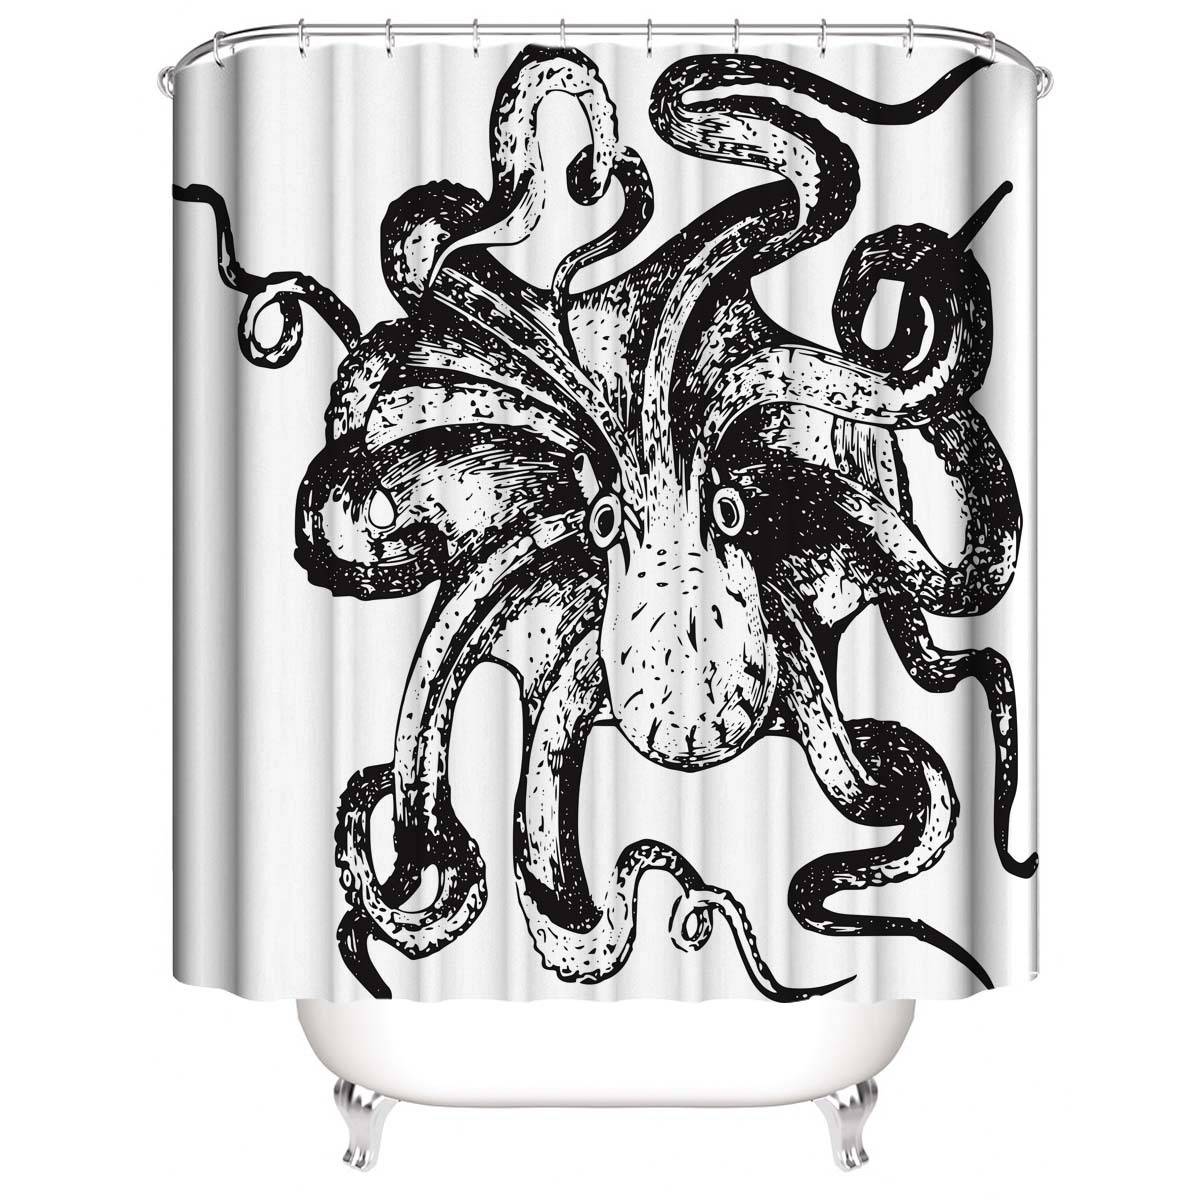 Black and White Octopus Shower Curtain | Black and White Octopus Bathroom Curtain